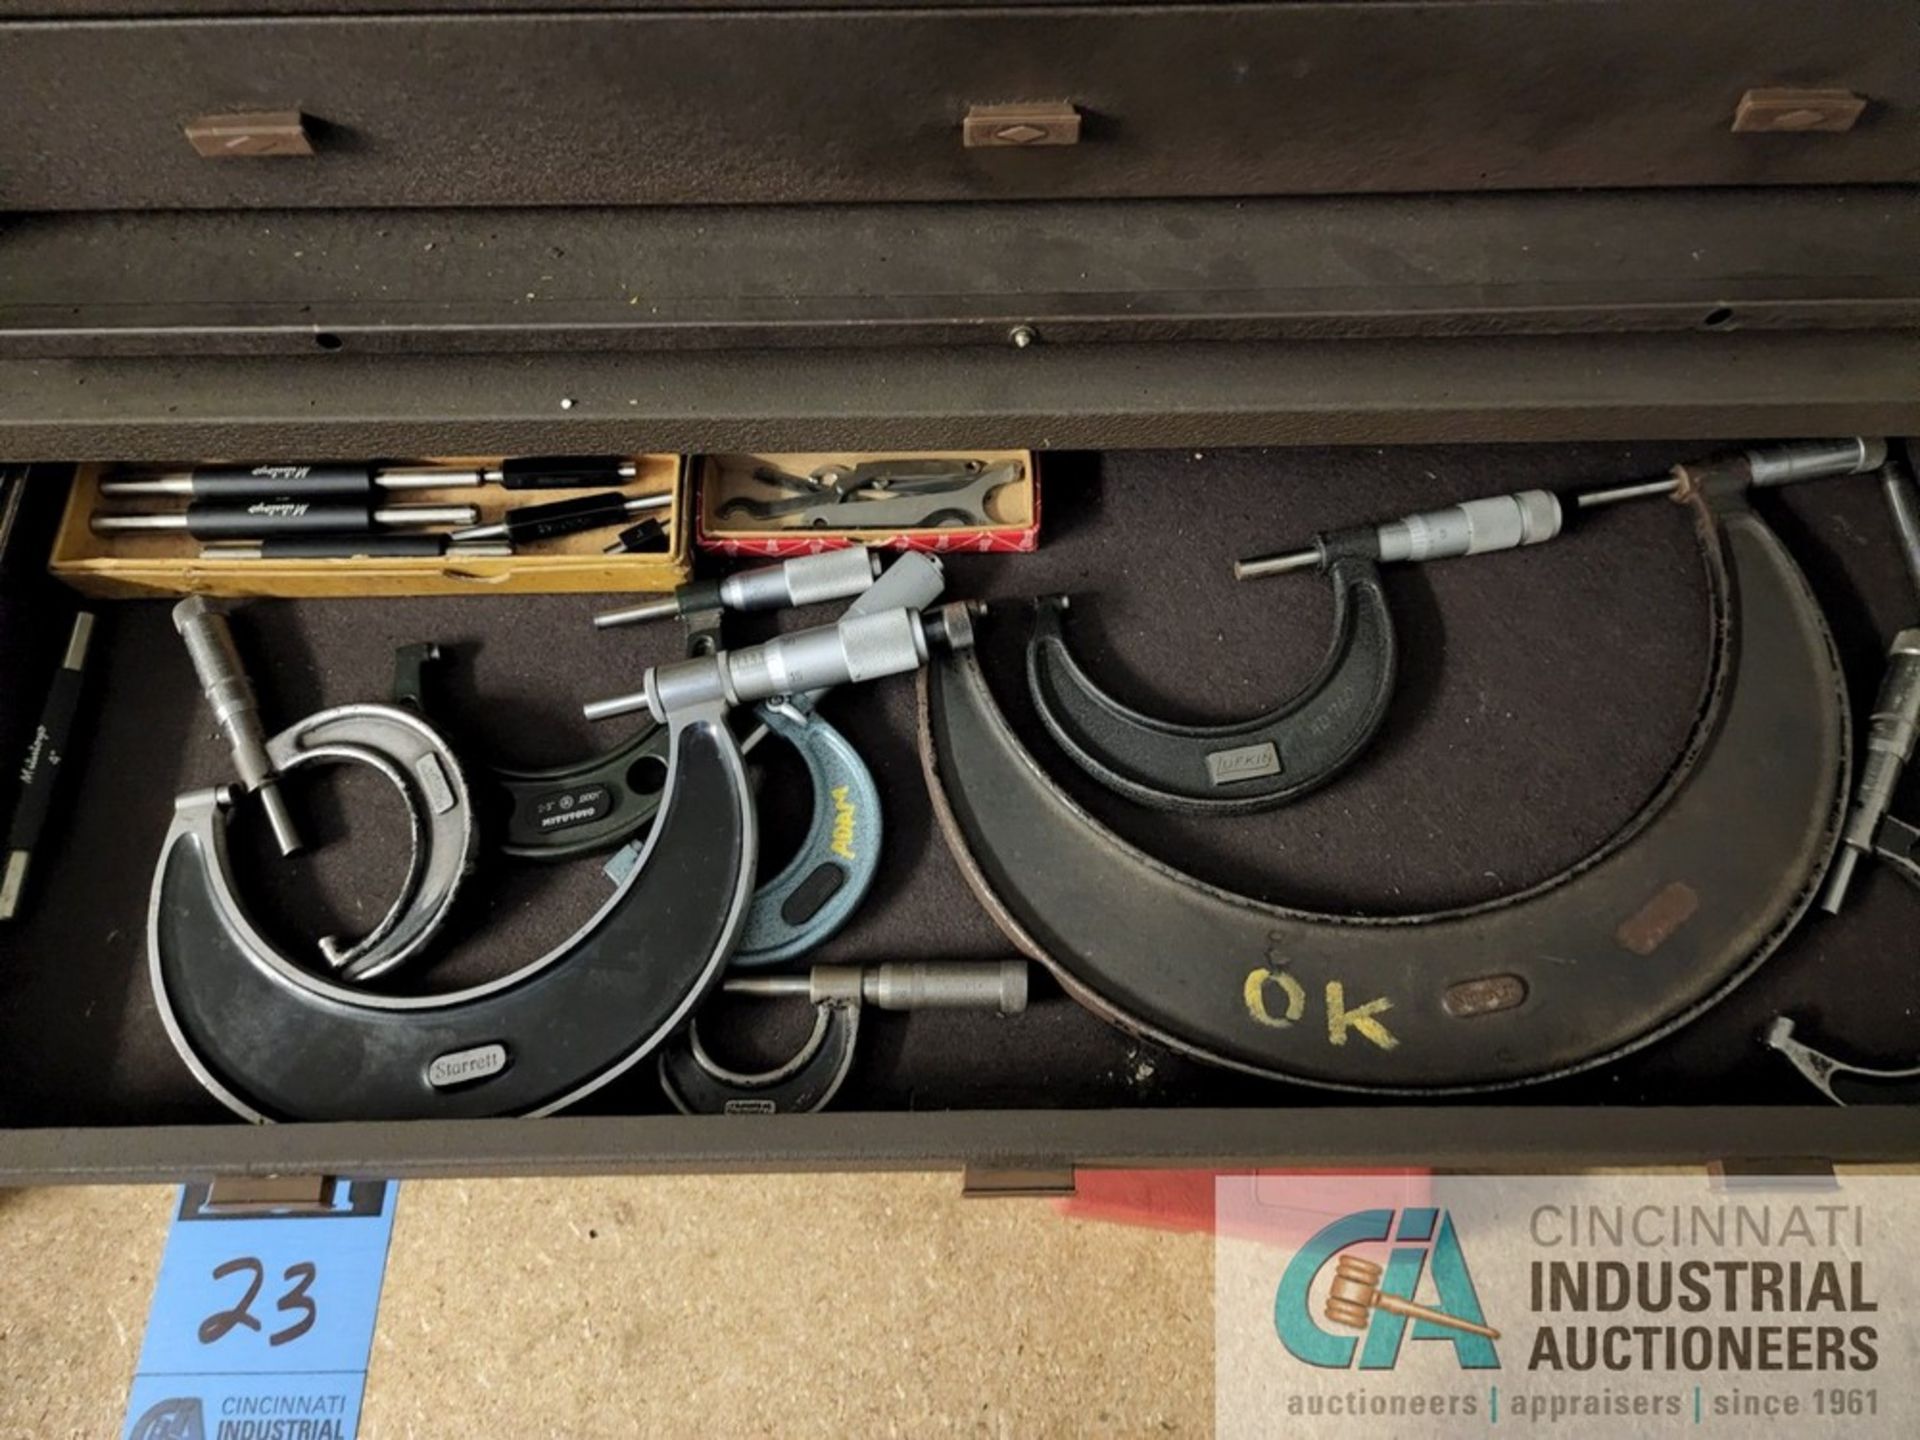 (LOT) KENNEDY TOOL BOX W/ SMALL MOUNT OF INSPECTION ITEMS, PIN GAGE INDEX, PIGEON HOLE CABINET W/ - Image 7 of 11